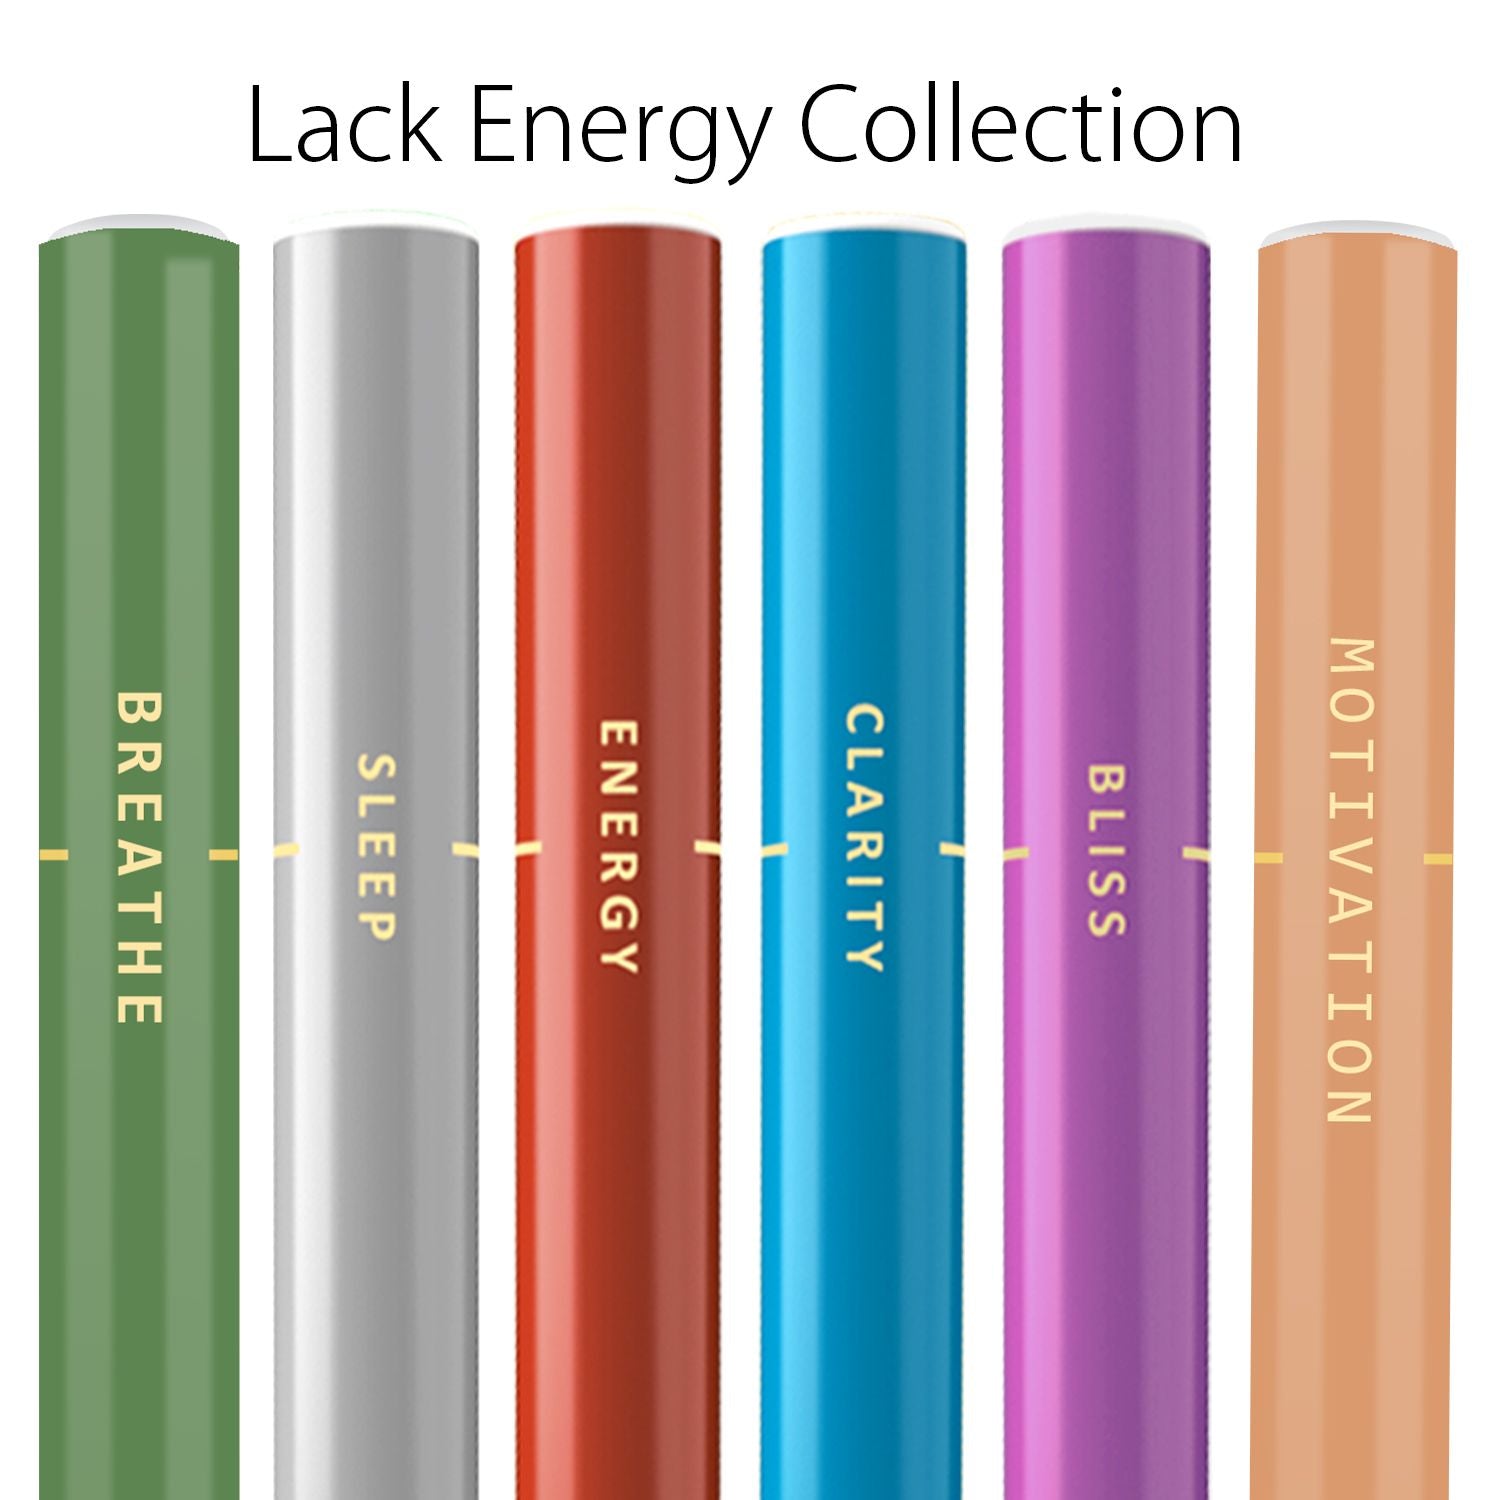 Lack Energy Collection